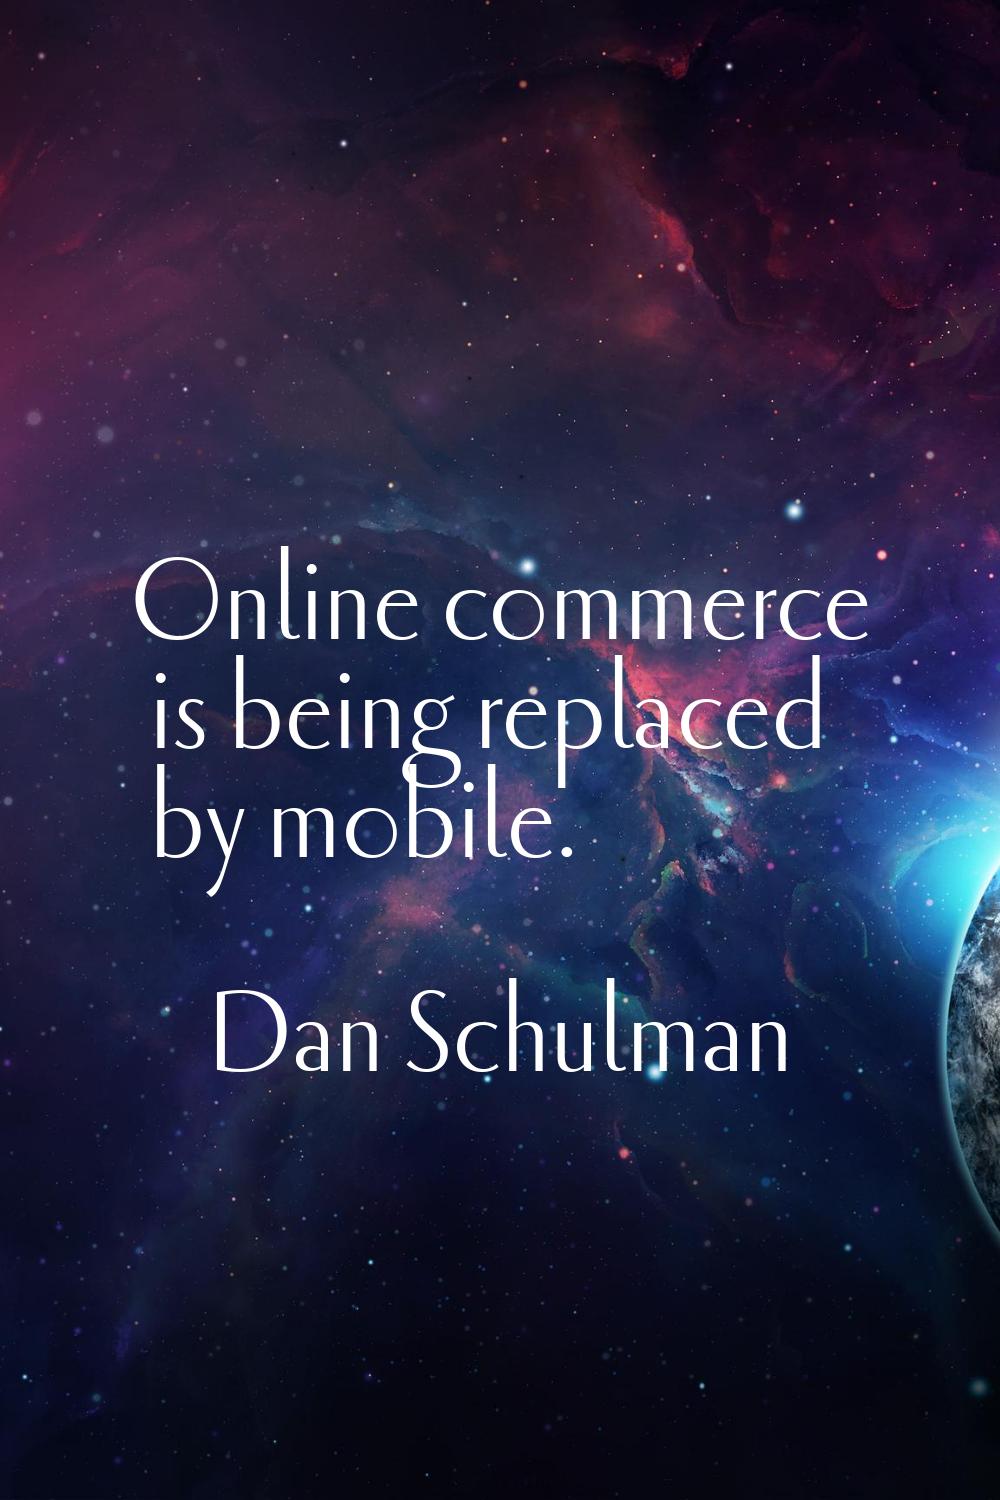 Online commerce is being replaced by mobile.